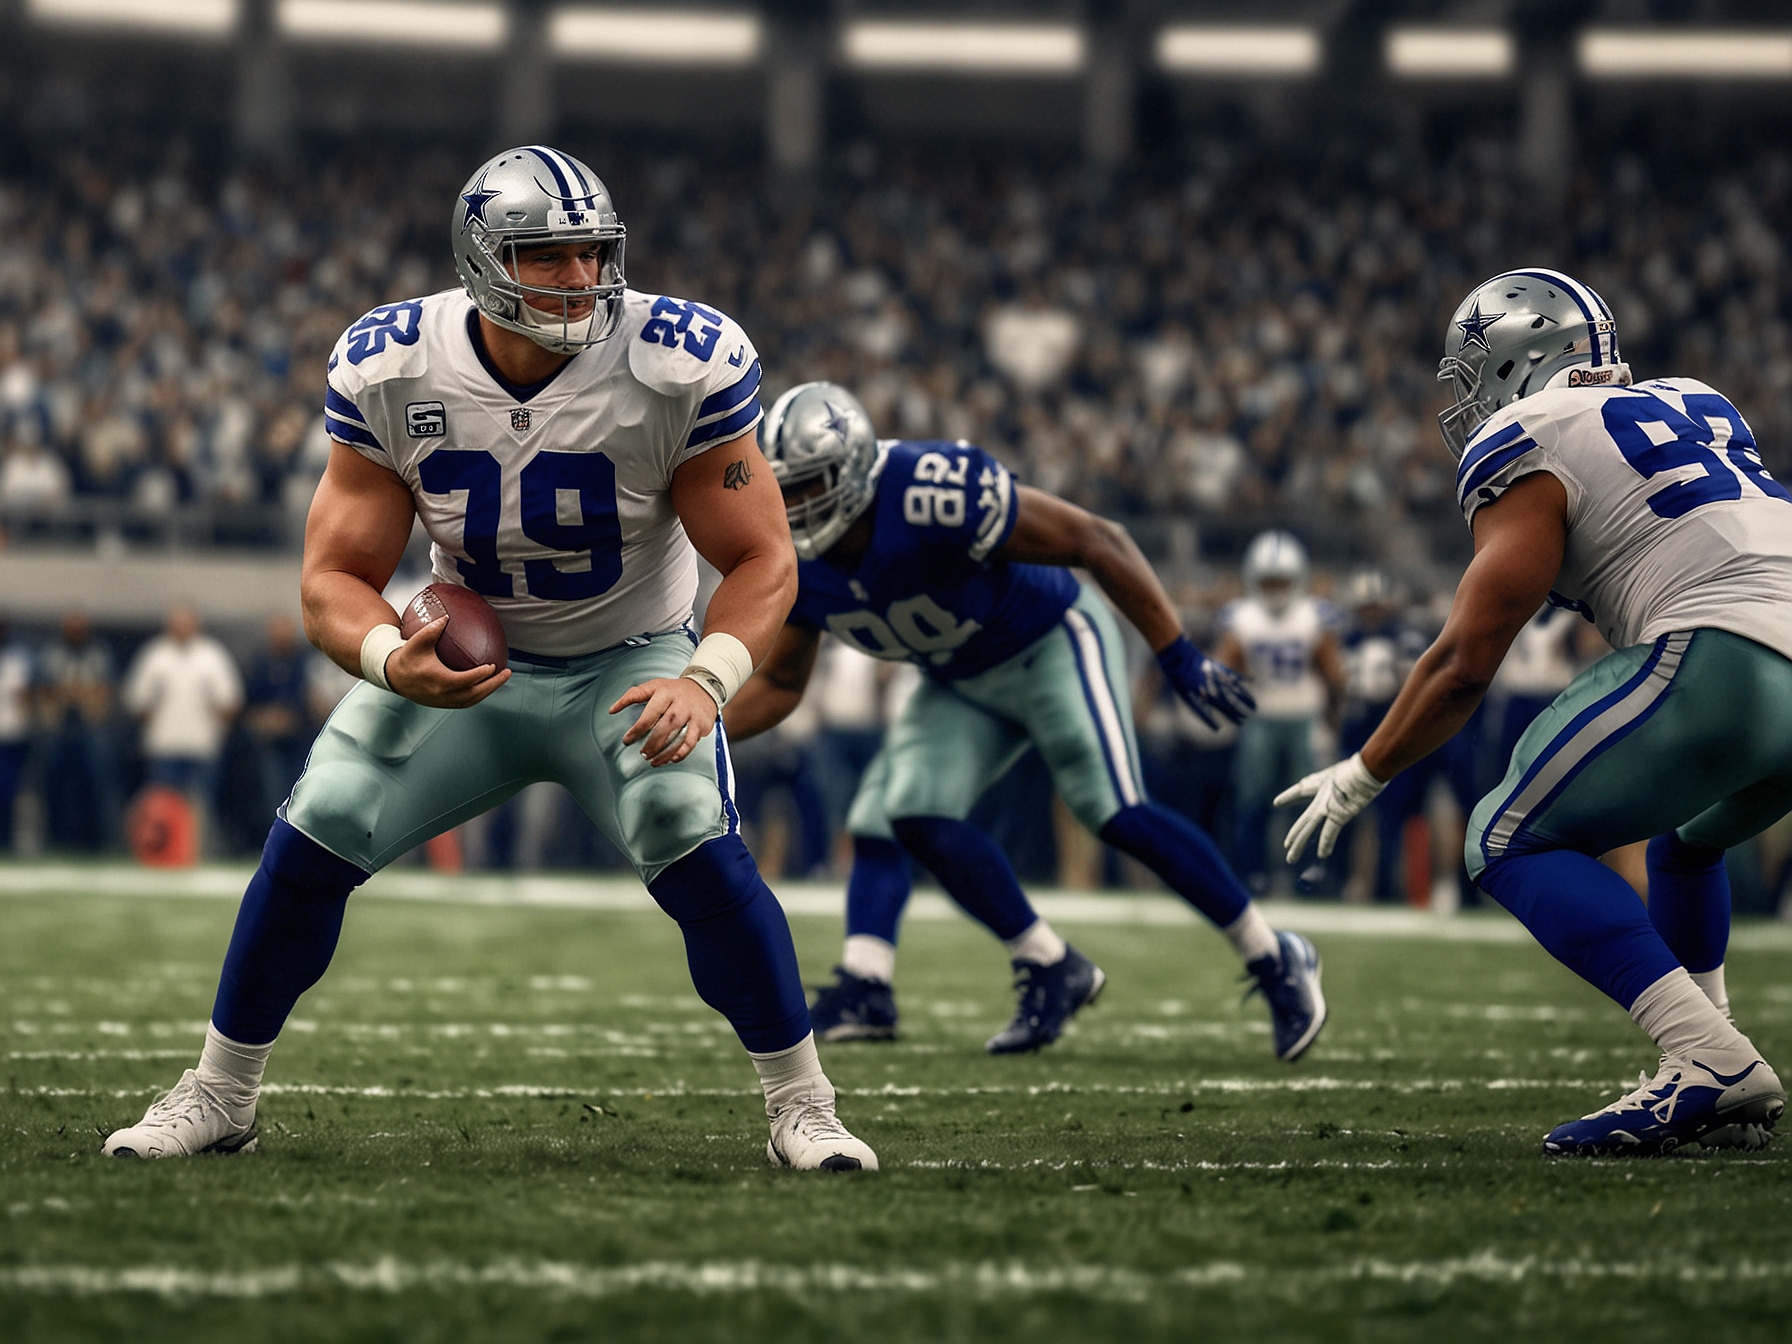 An image illustrating Connor Williams in action, demonstrating his blocking technique and versatility on the field as he transitions from guard to center during a Dallas Cowboys game.